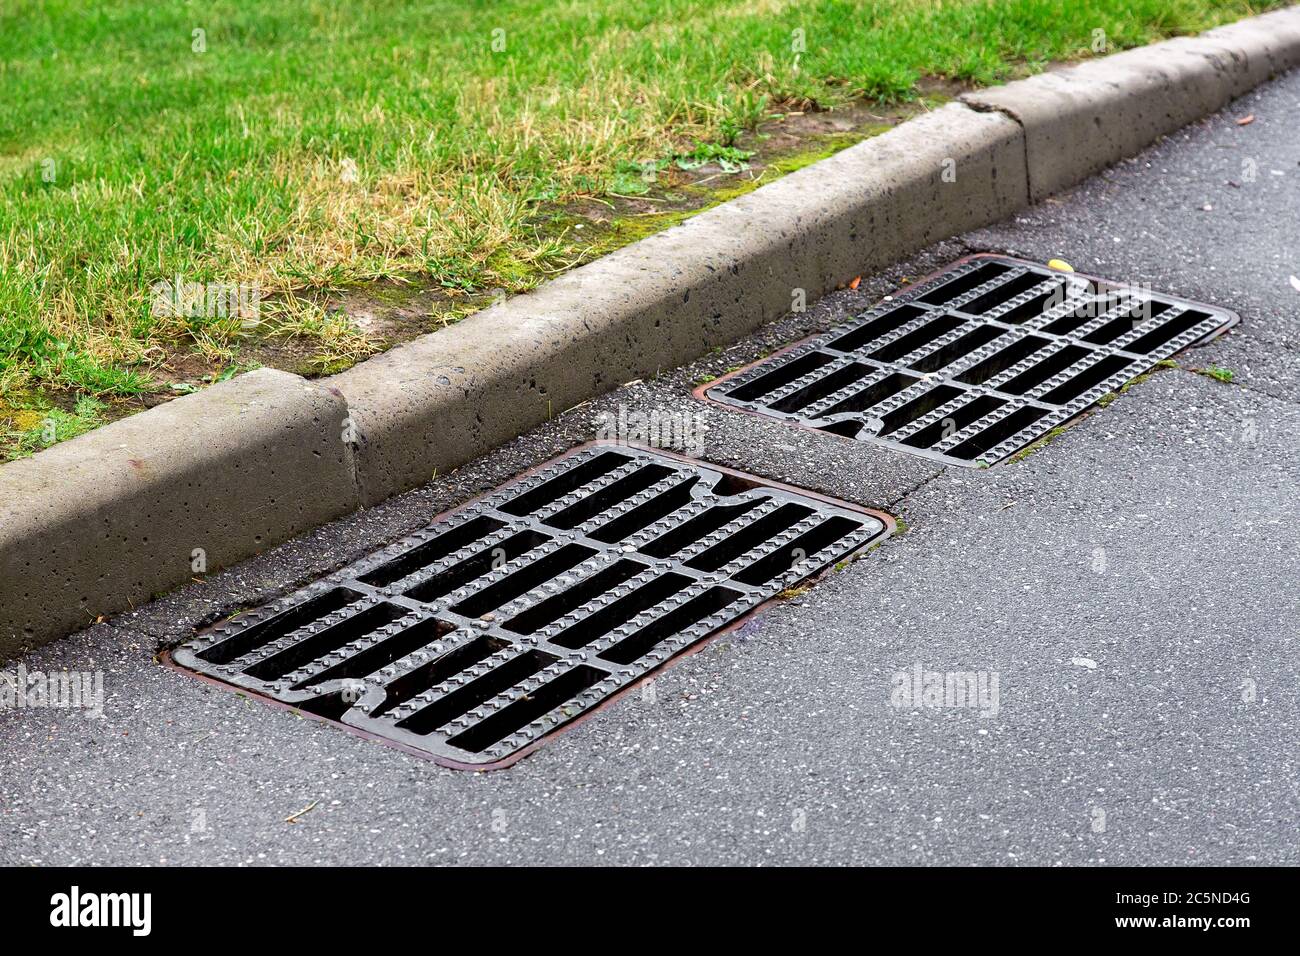 manhole cover rain grate on an asphalt road near a stone curb on the side of the road green grass. Stock Photo